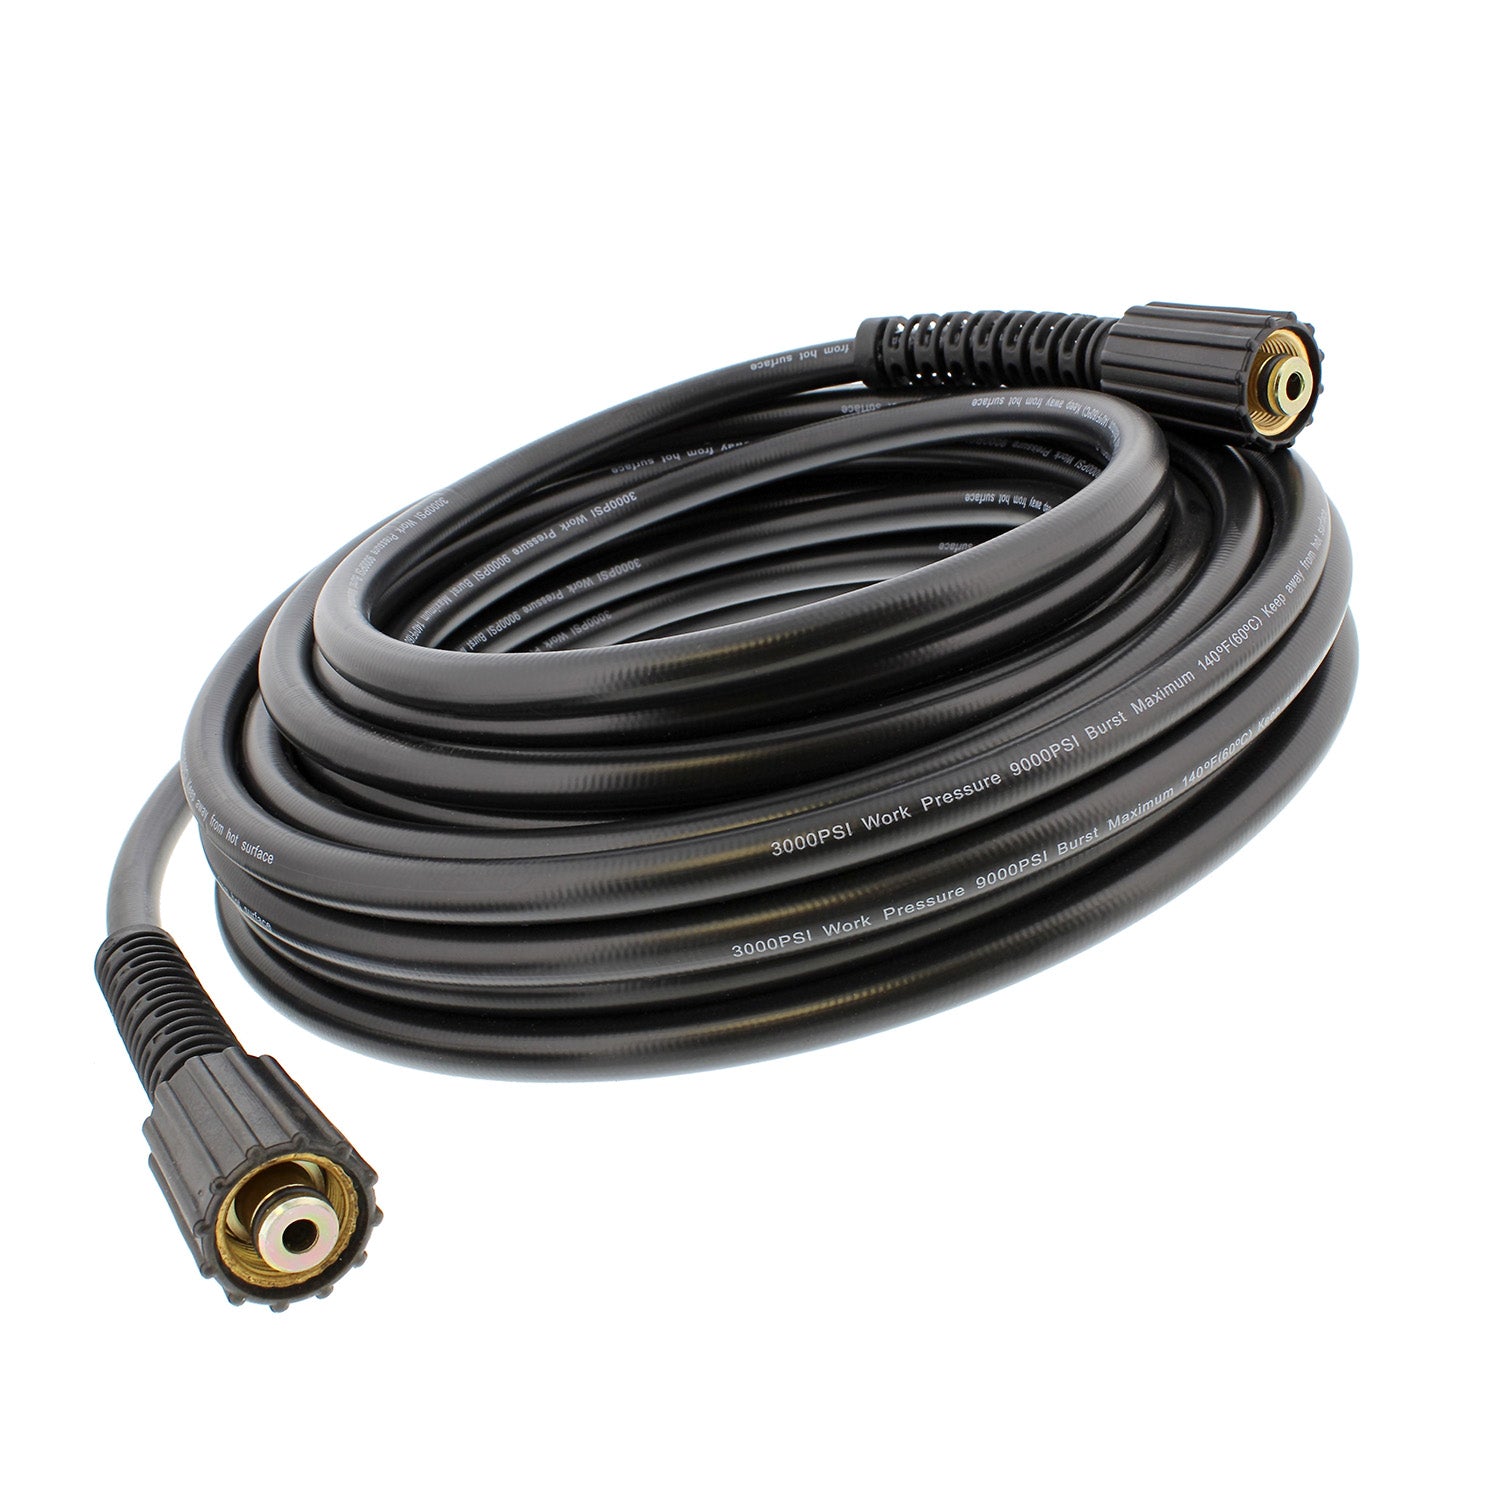 Pressure Washer Hose 50 FT - 3000 PSI Power Washer Hose, M22 Fittings